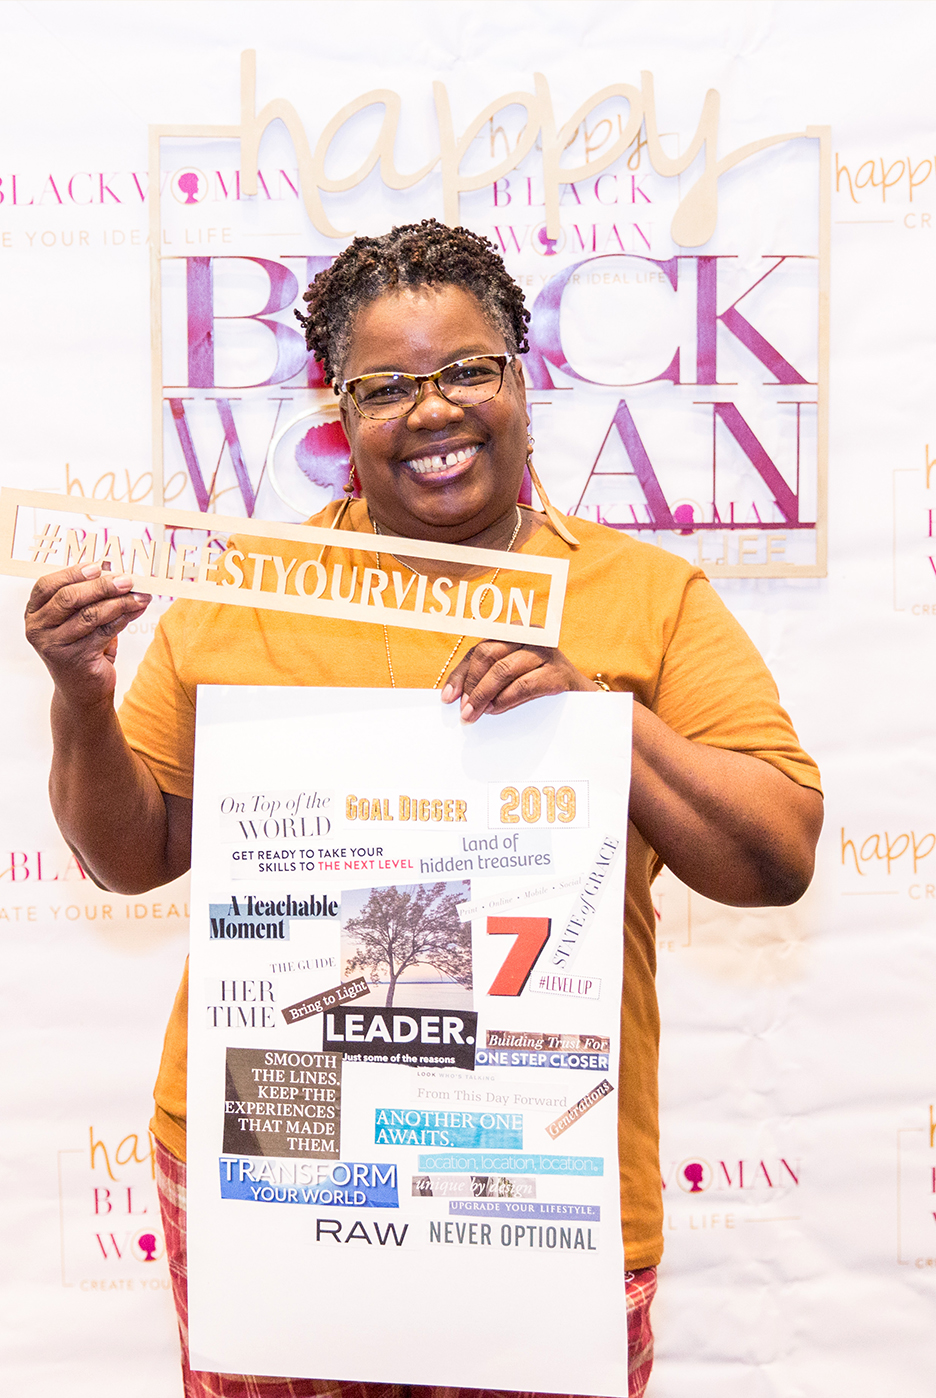 Black woman smiling as she holds up her vision board